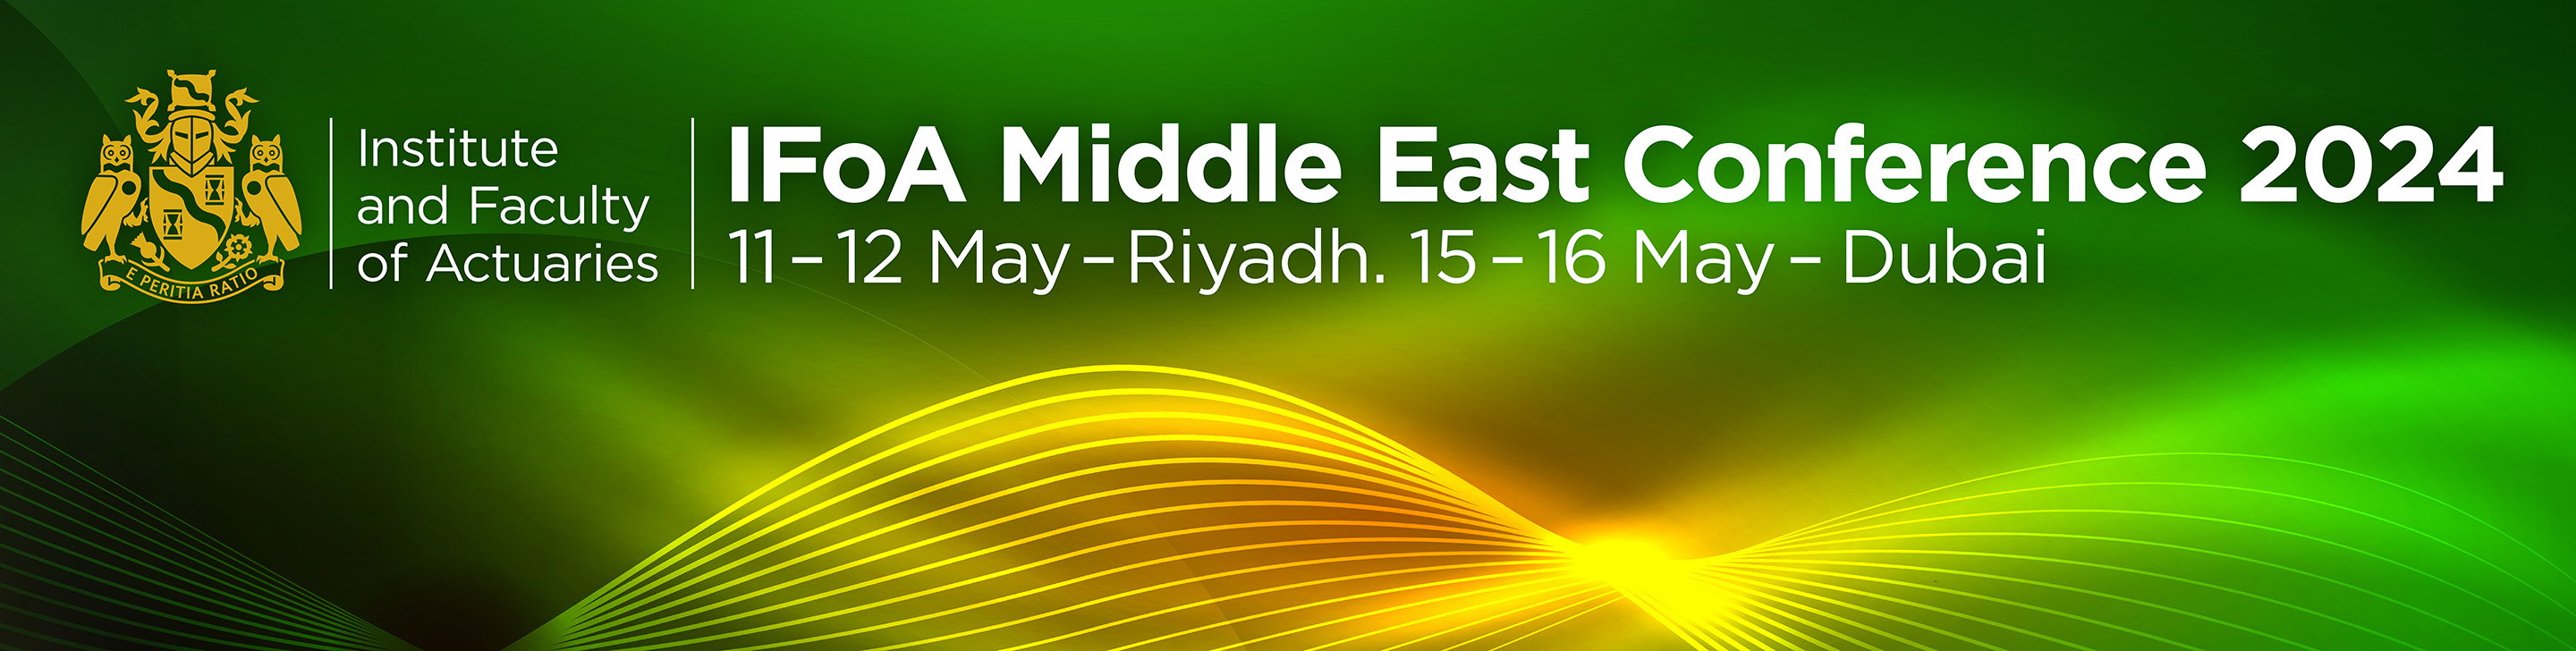 IFoA Middle East Conference 2024: 11 to 12 May, Riyadh, 15 to 16 May, Dubai